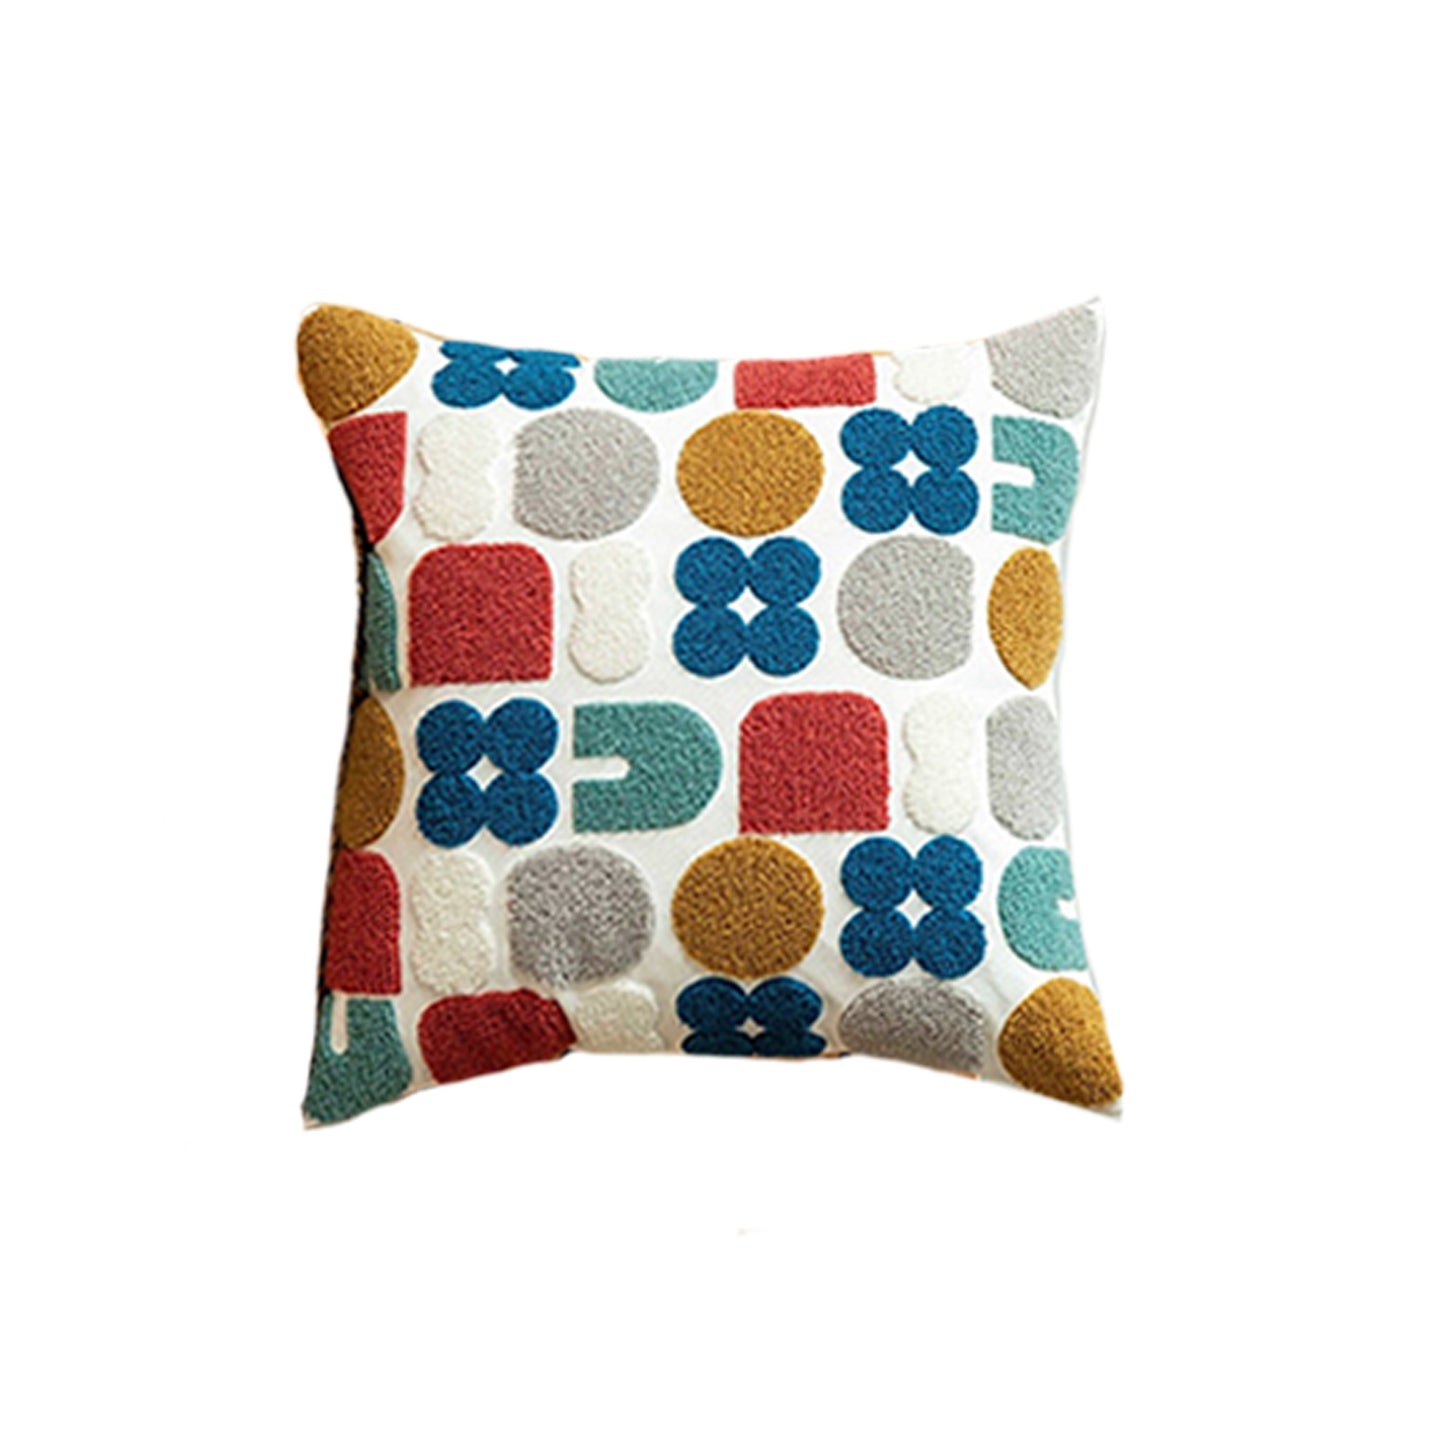 Dots Floral Cushion Covers